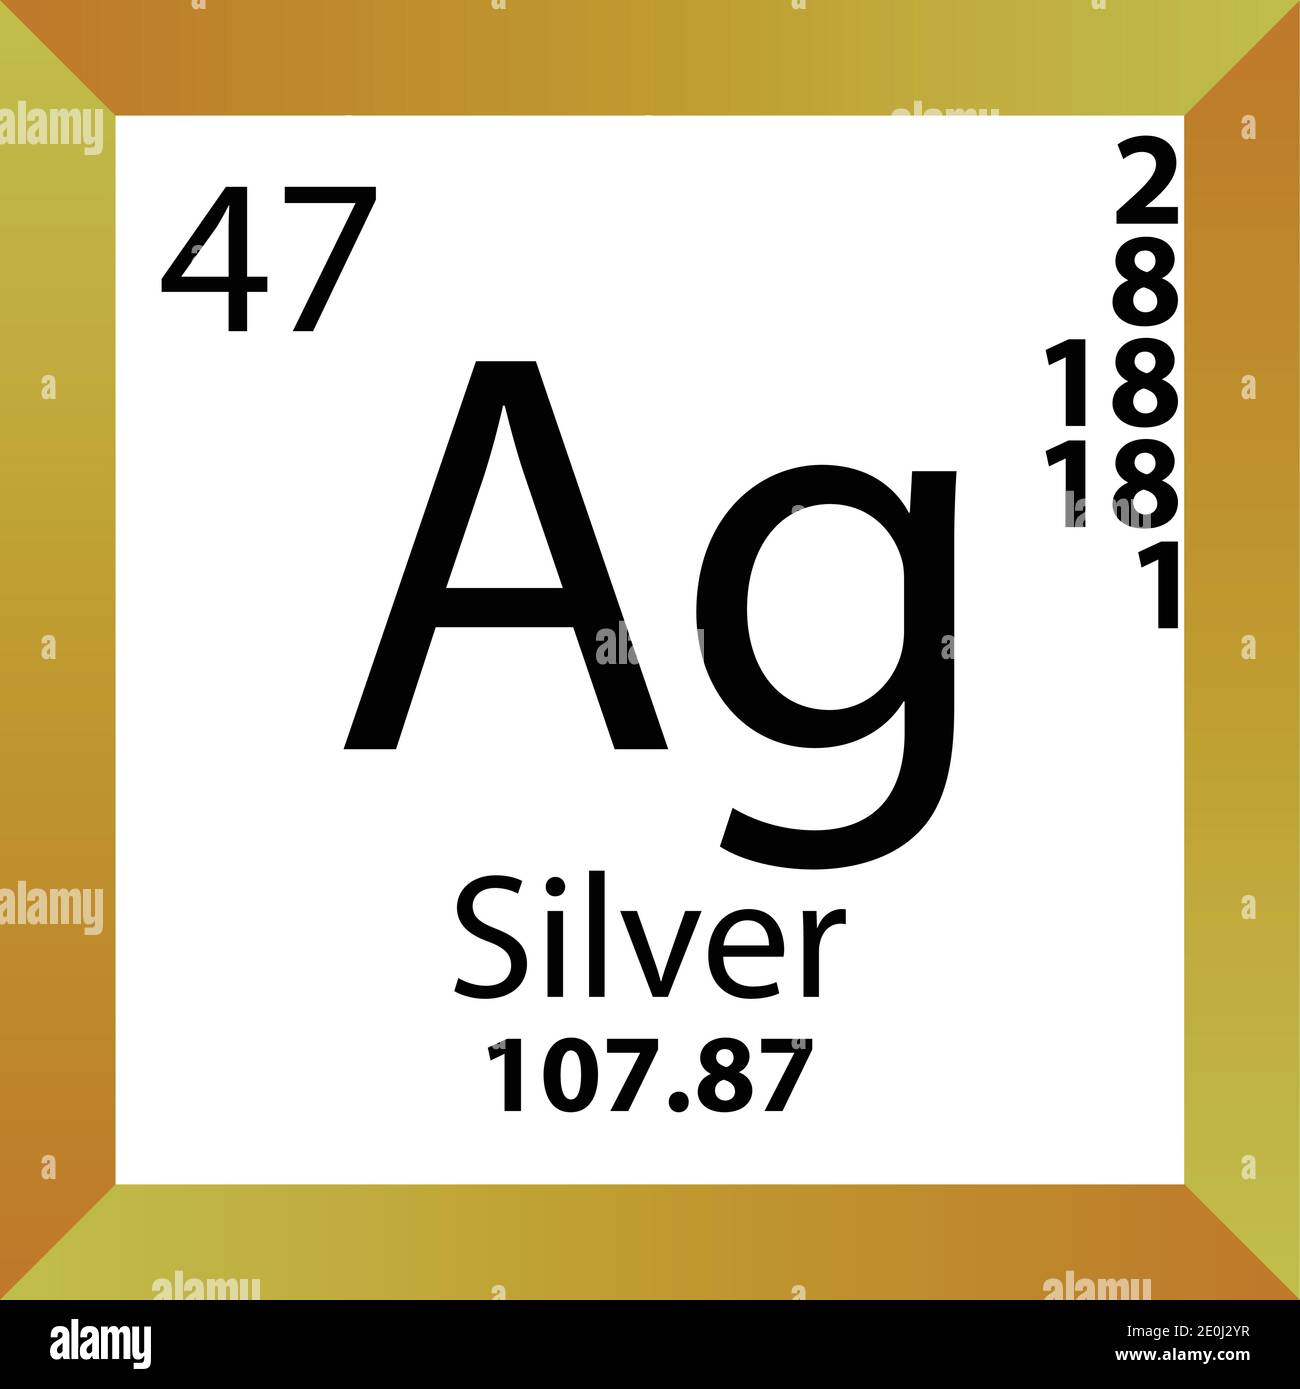 Ag Silver Chemical Element Periodic Table. Single vector illustration, colorful Icon with molar mass, electron conf. and atomic number. Stock Vector